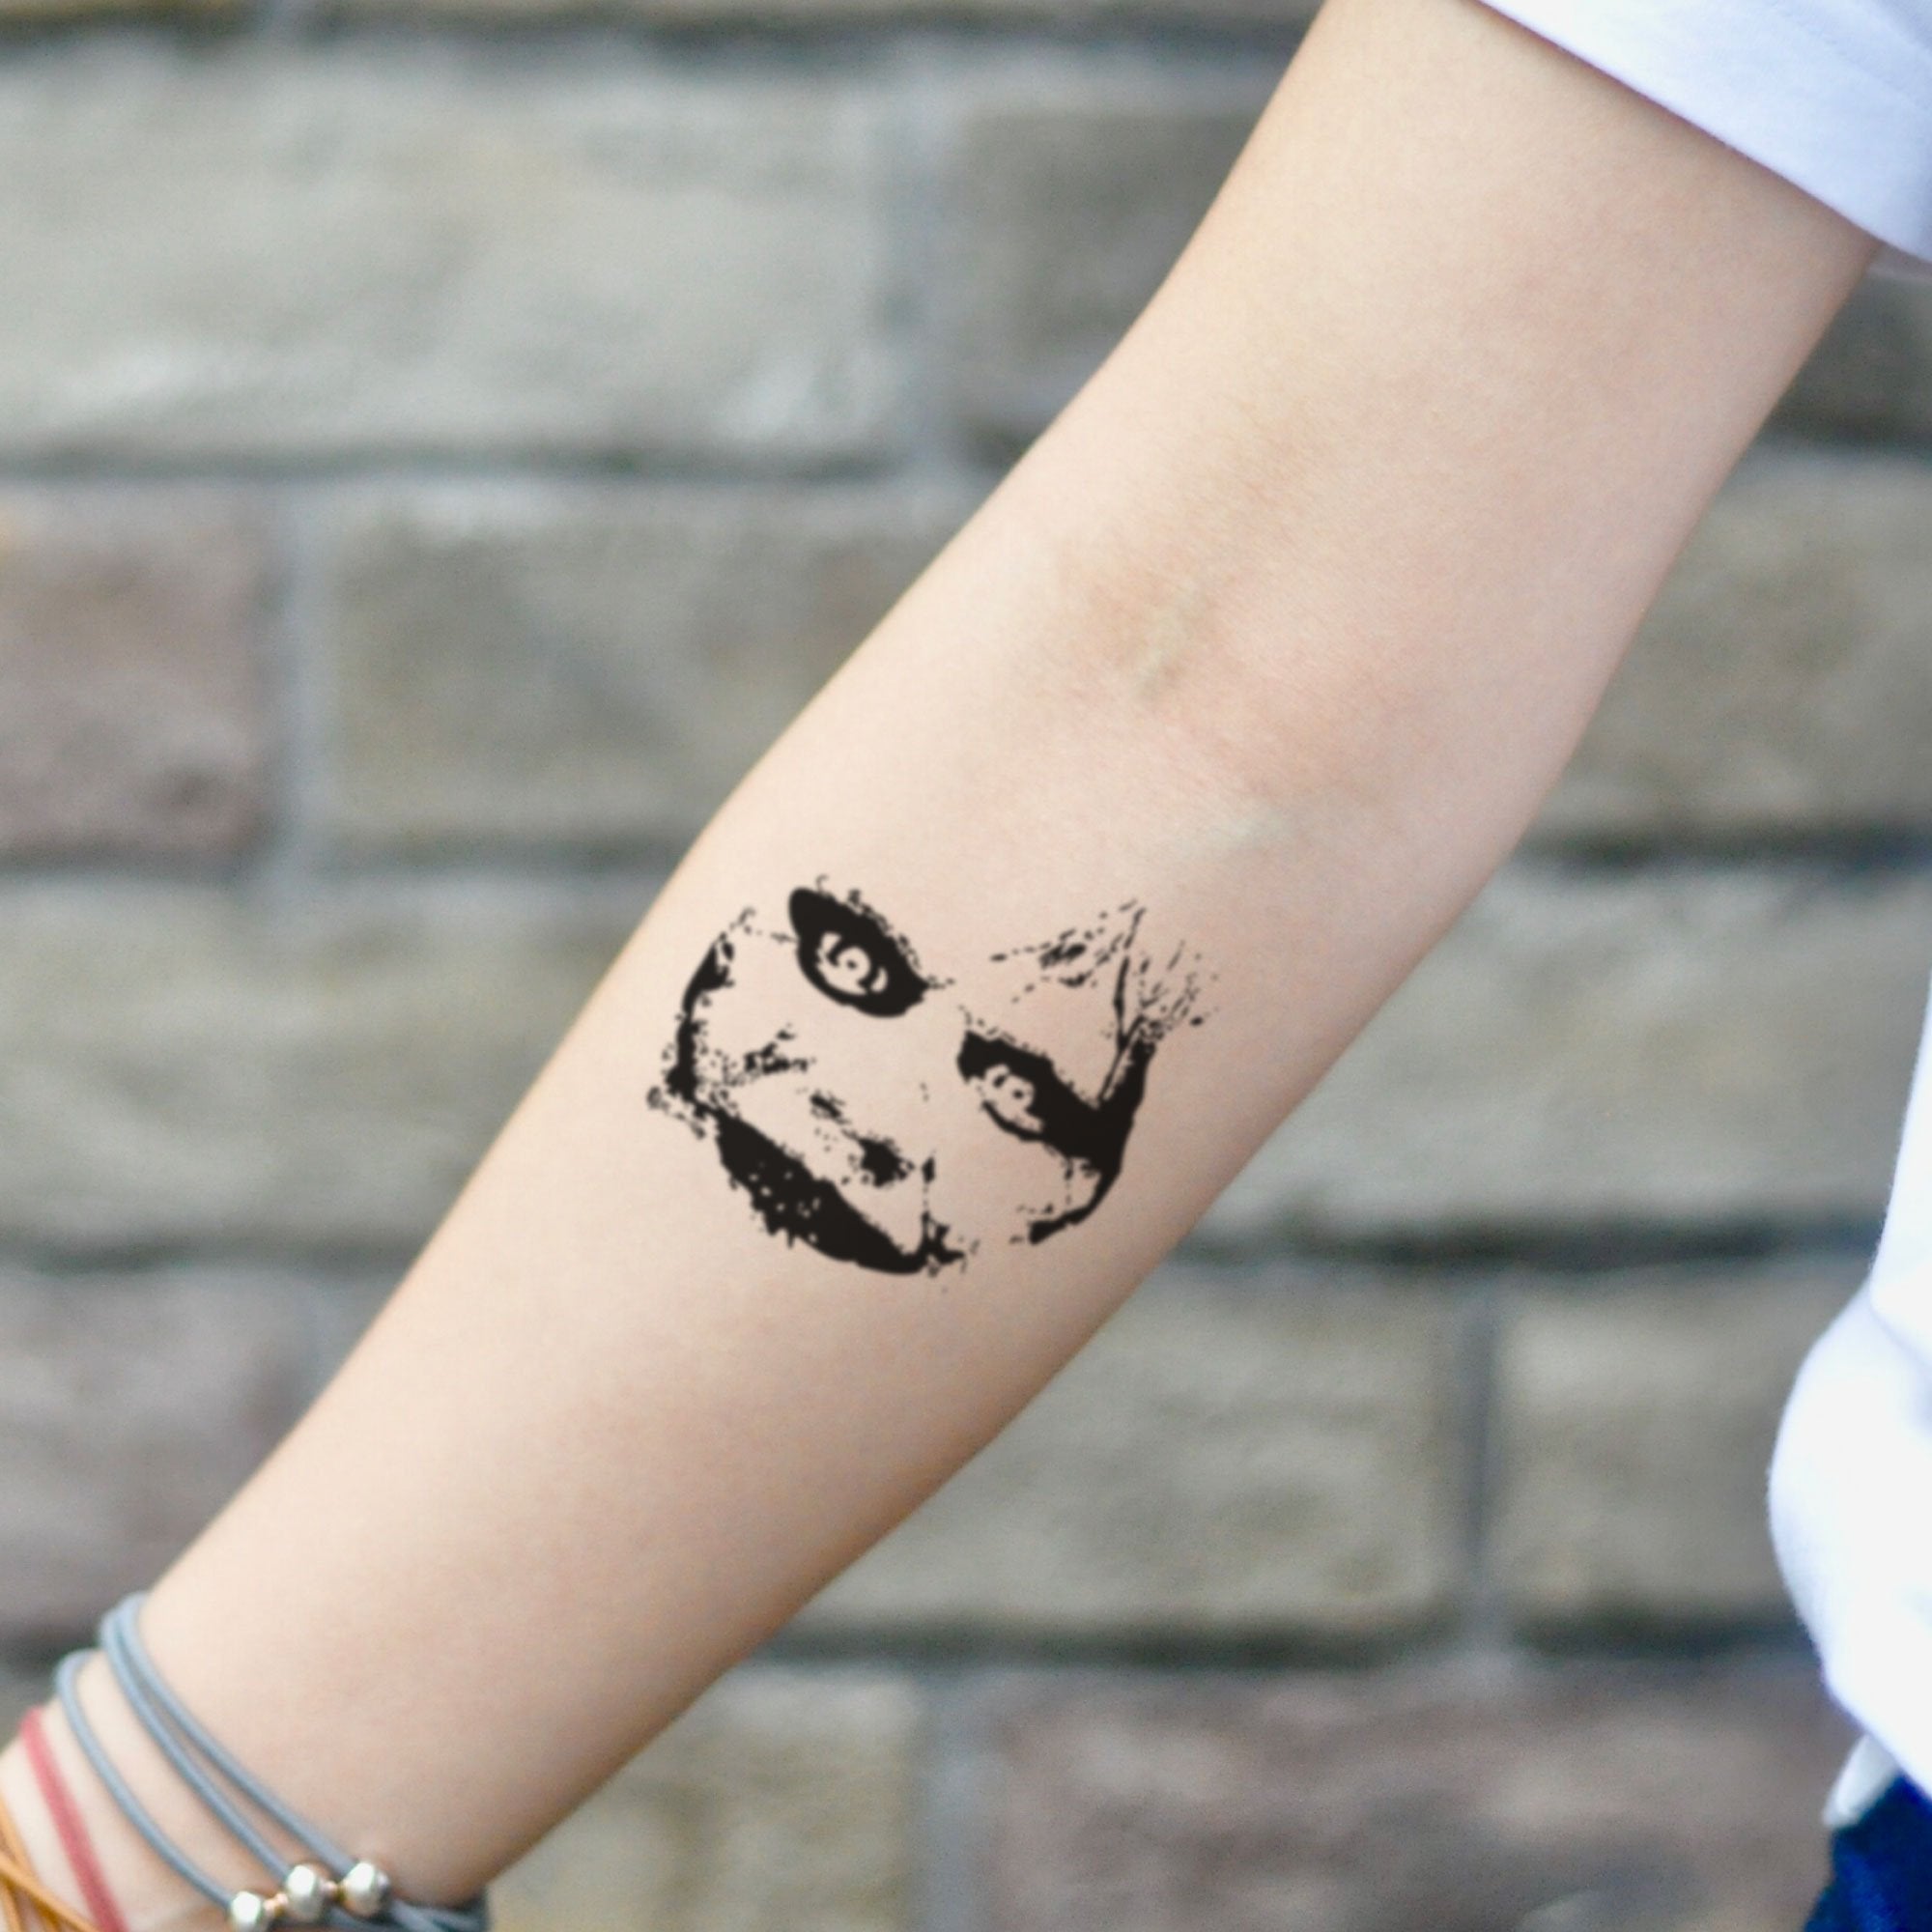 12 Tiny Halloween Tattoos That Are More Edgy Than ScaryHelloGiggles